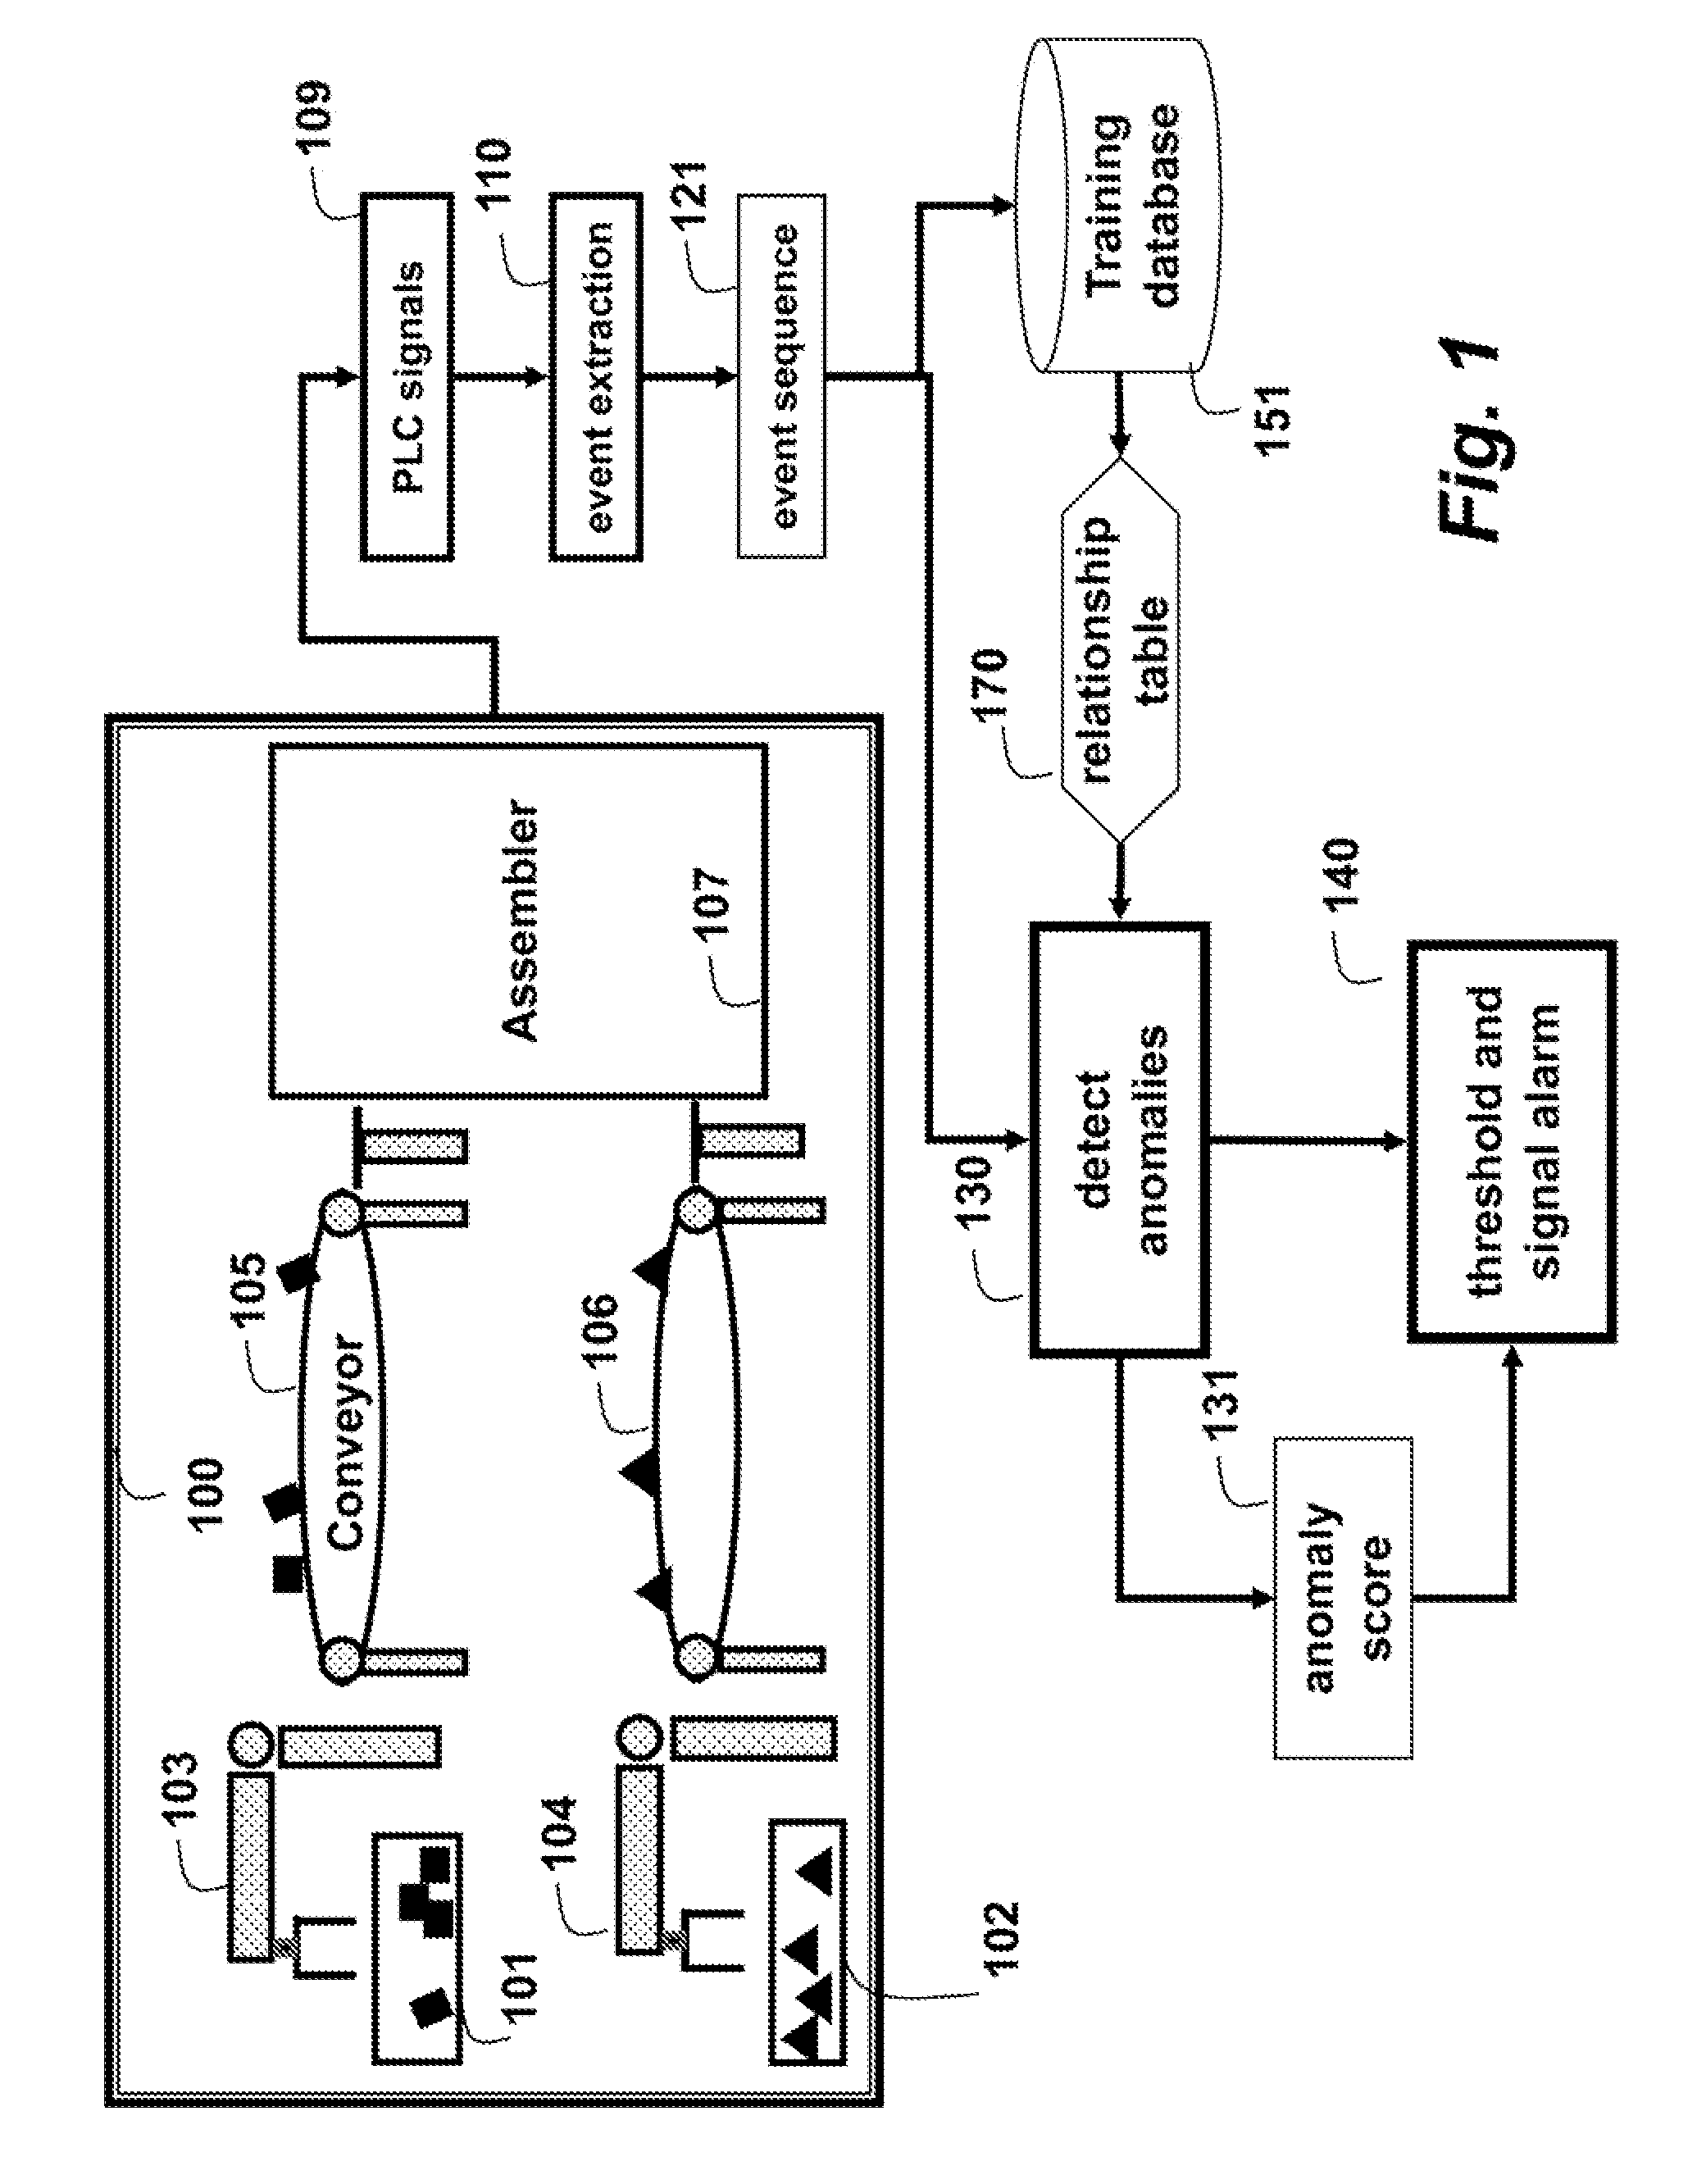 Method for Anomaly Detection in Discrete Manufacturing Processes